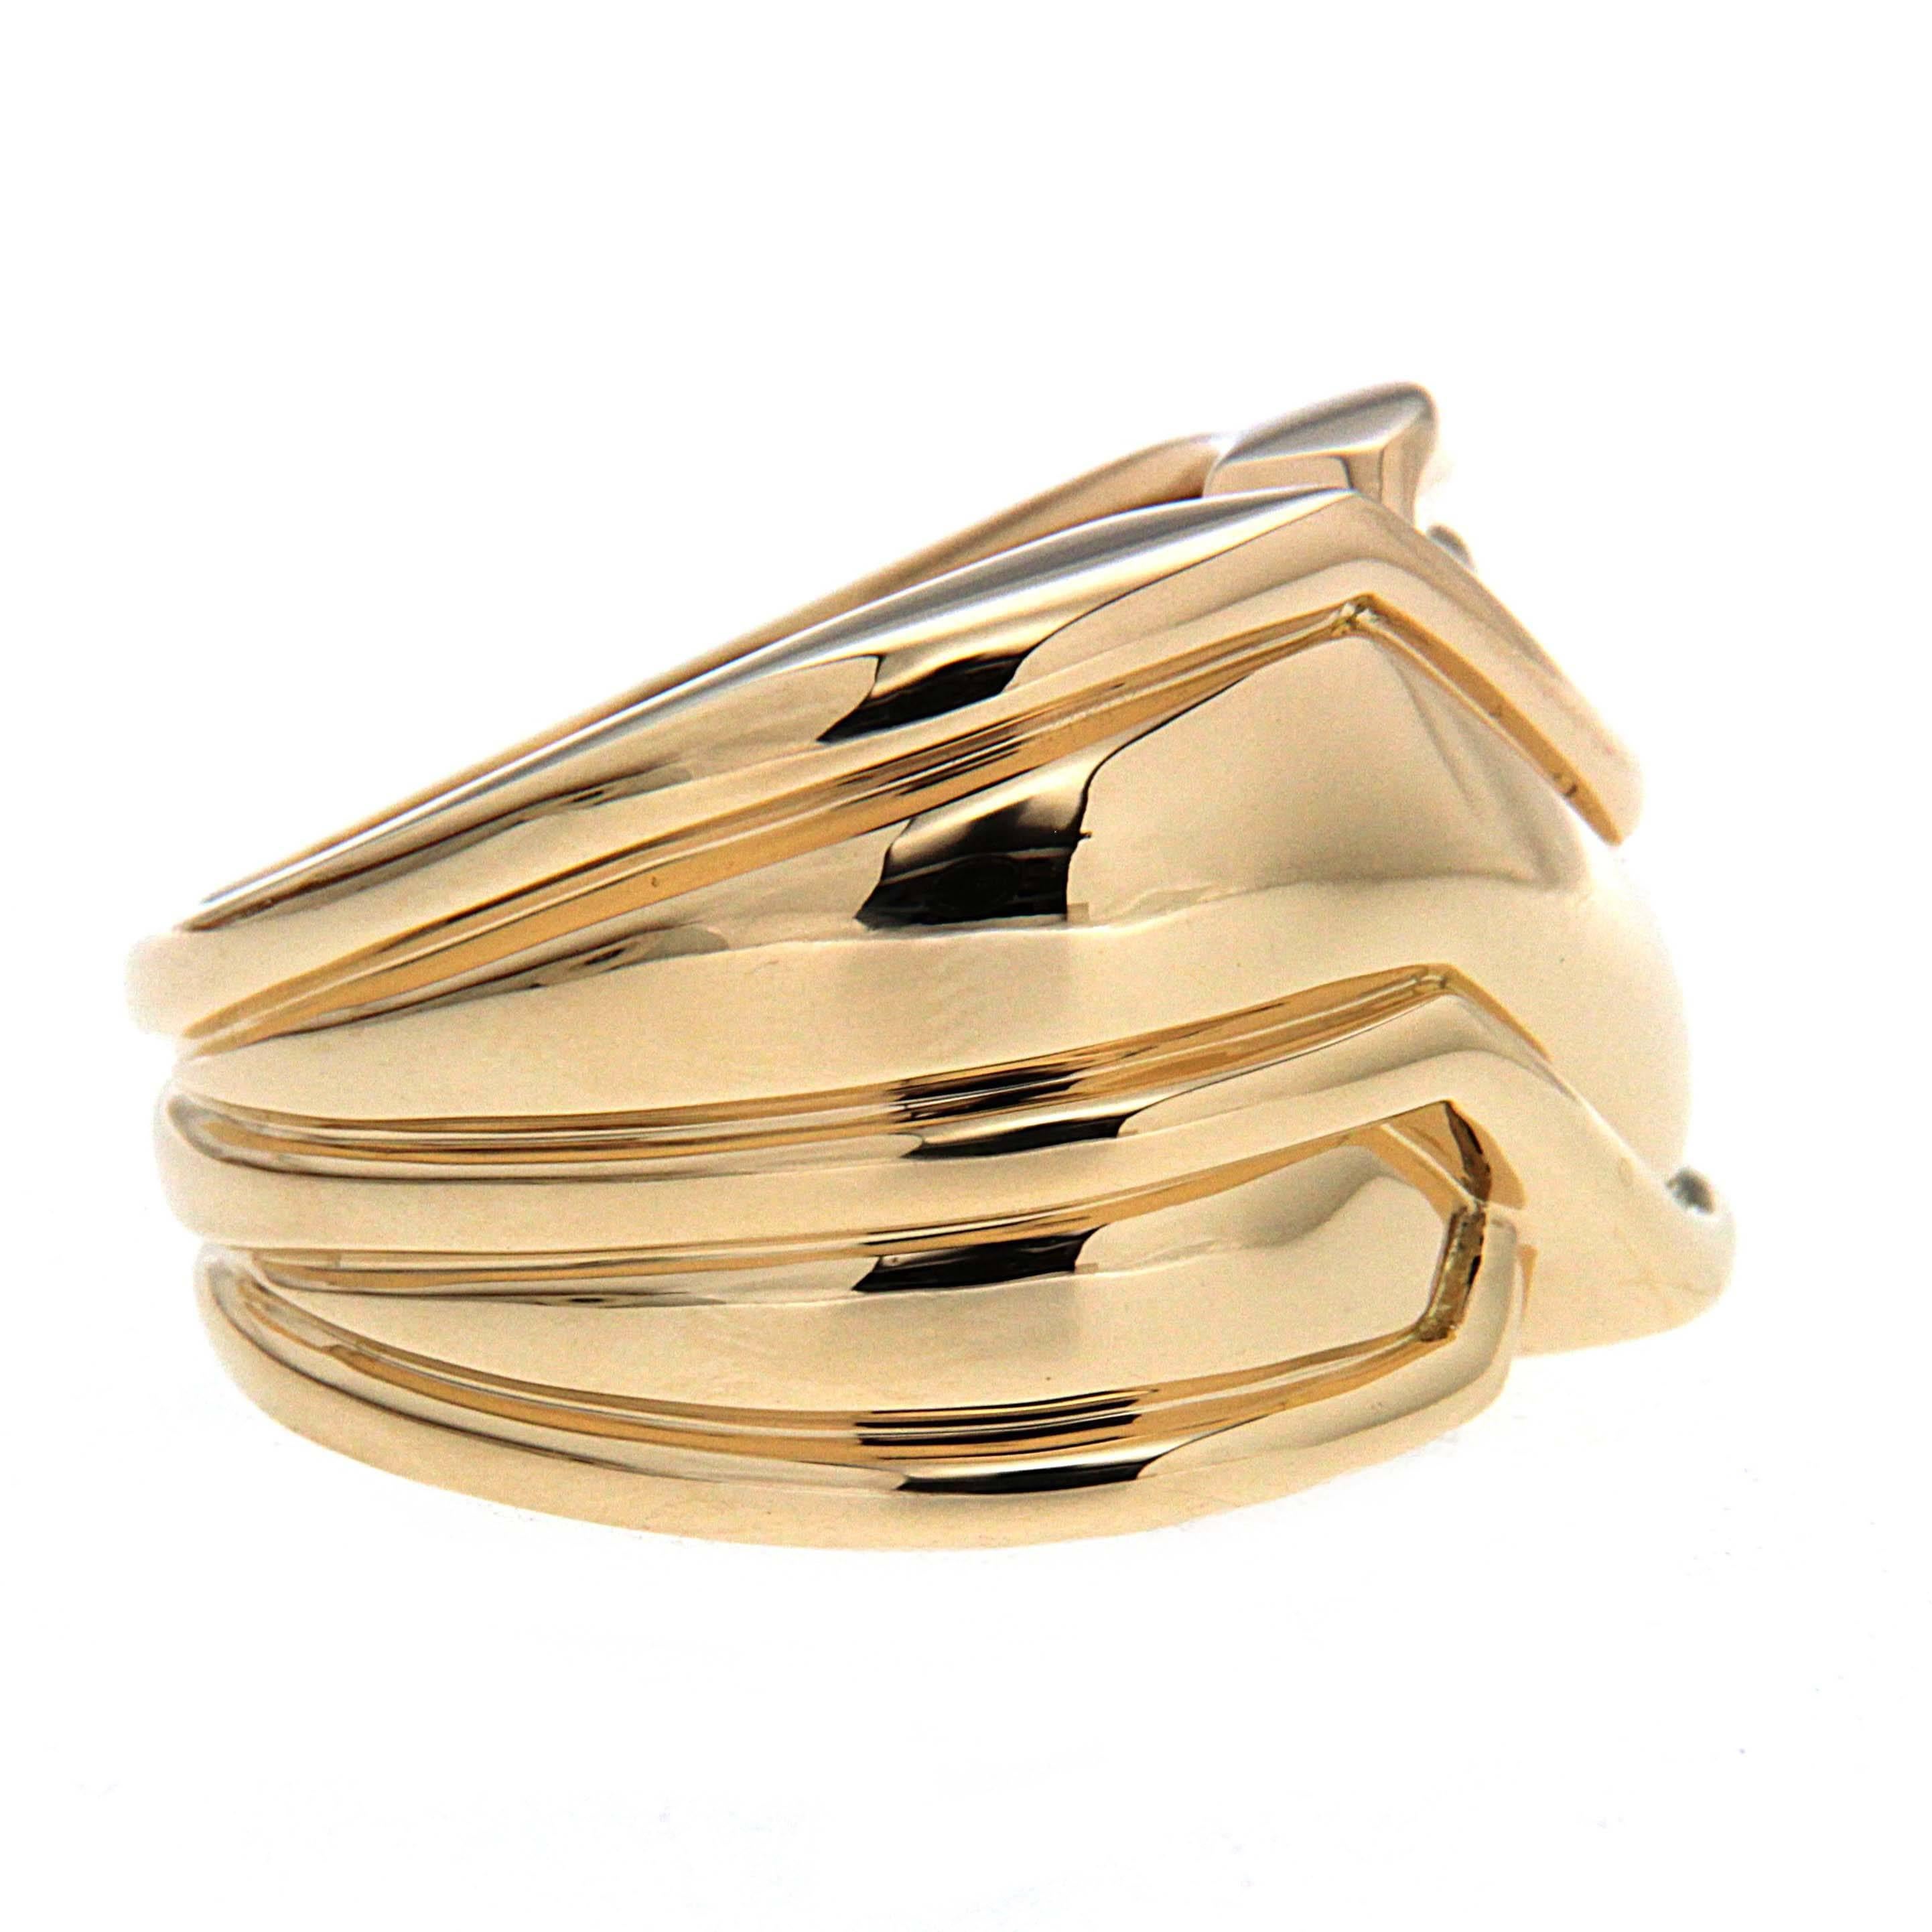 This 18k yellow gold ring concentrates on sleek lines and high polish. The design resembles two side by side bands, each with a groove along their edges. On the knuckle side of the hand, one shank crosses over the other, forming an X. The ring is